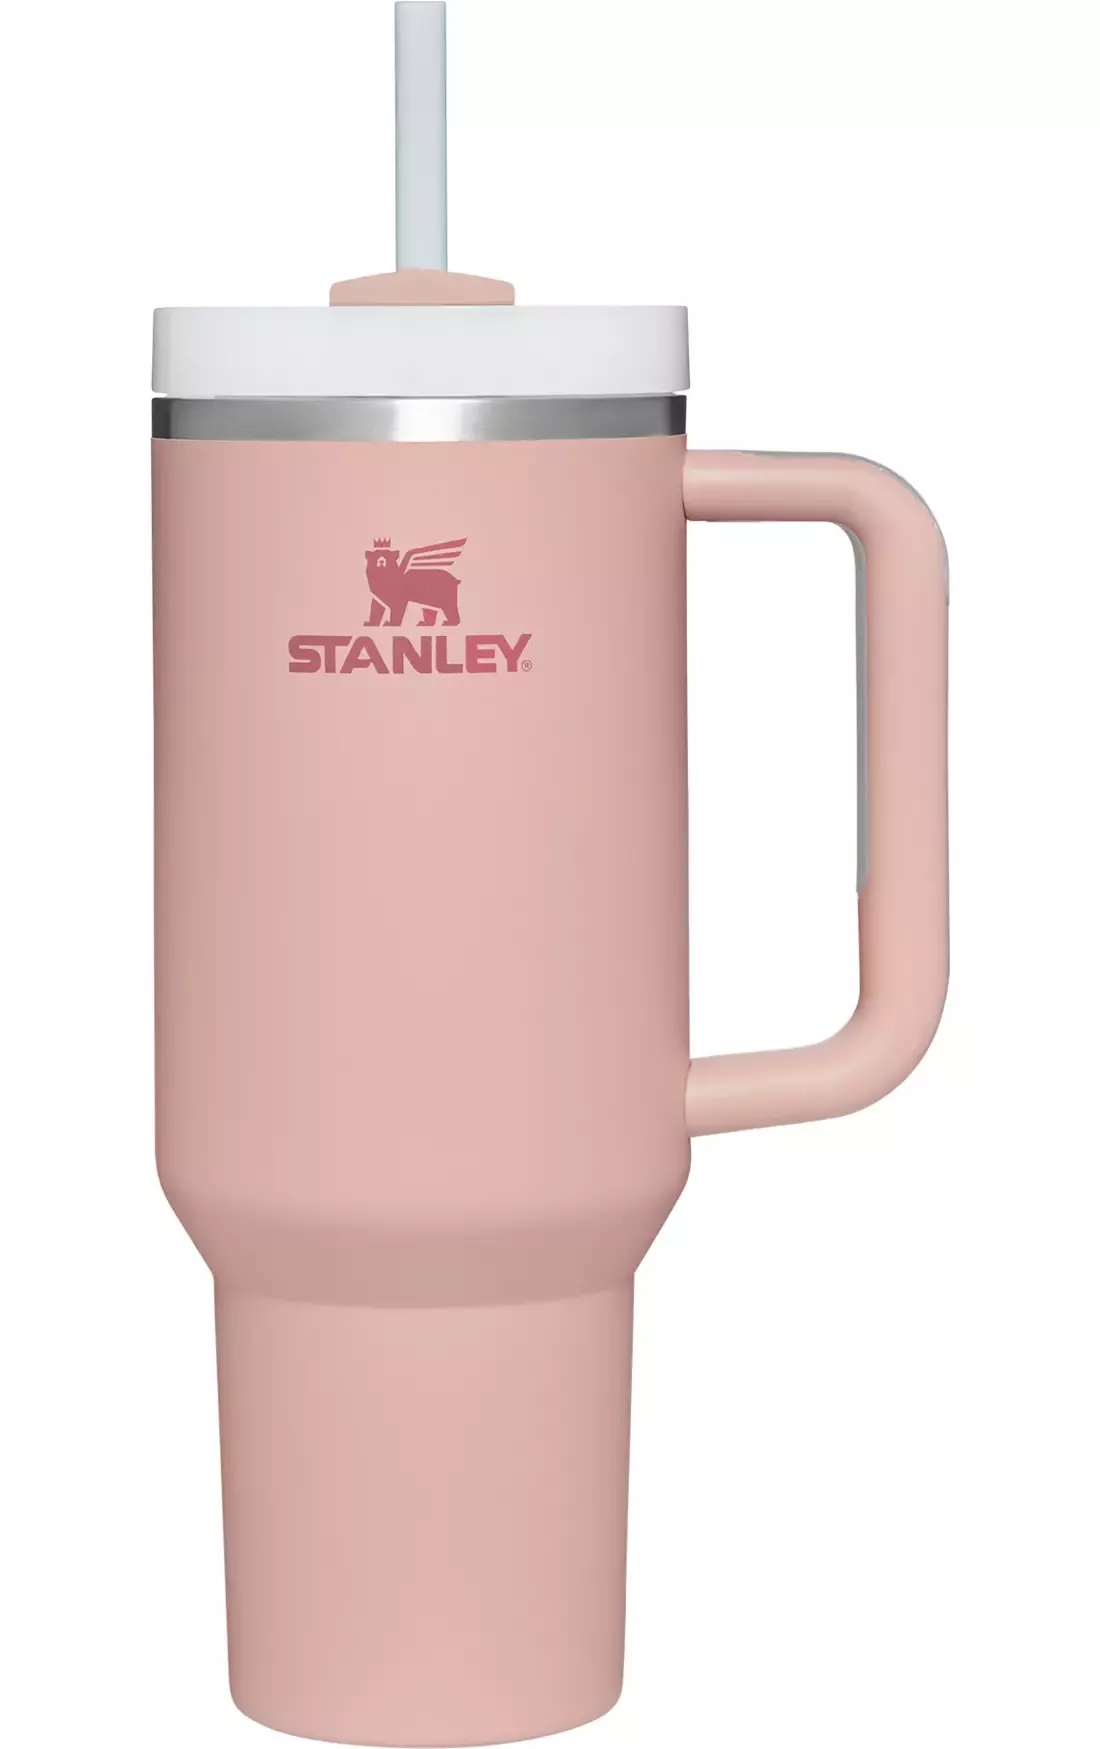 Stanley 40 oz. Quencher H2.0 … curated on LTK